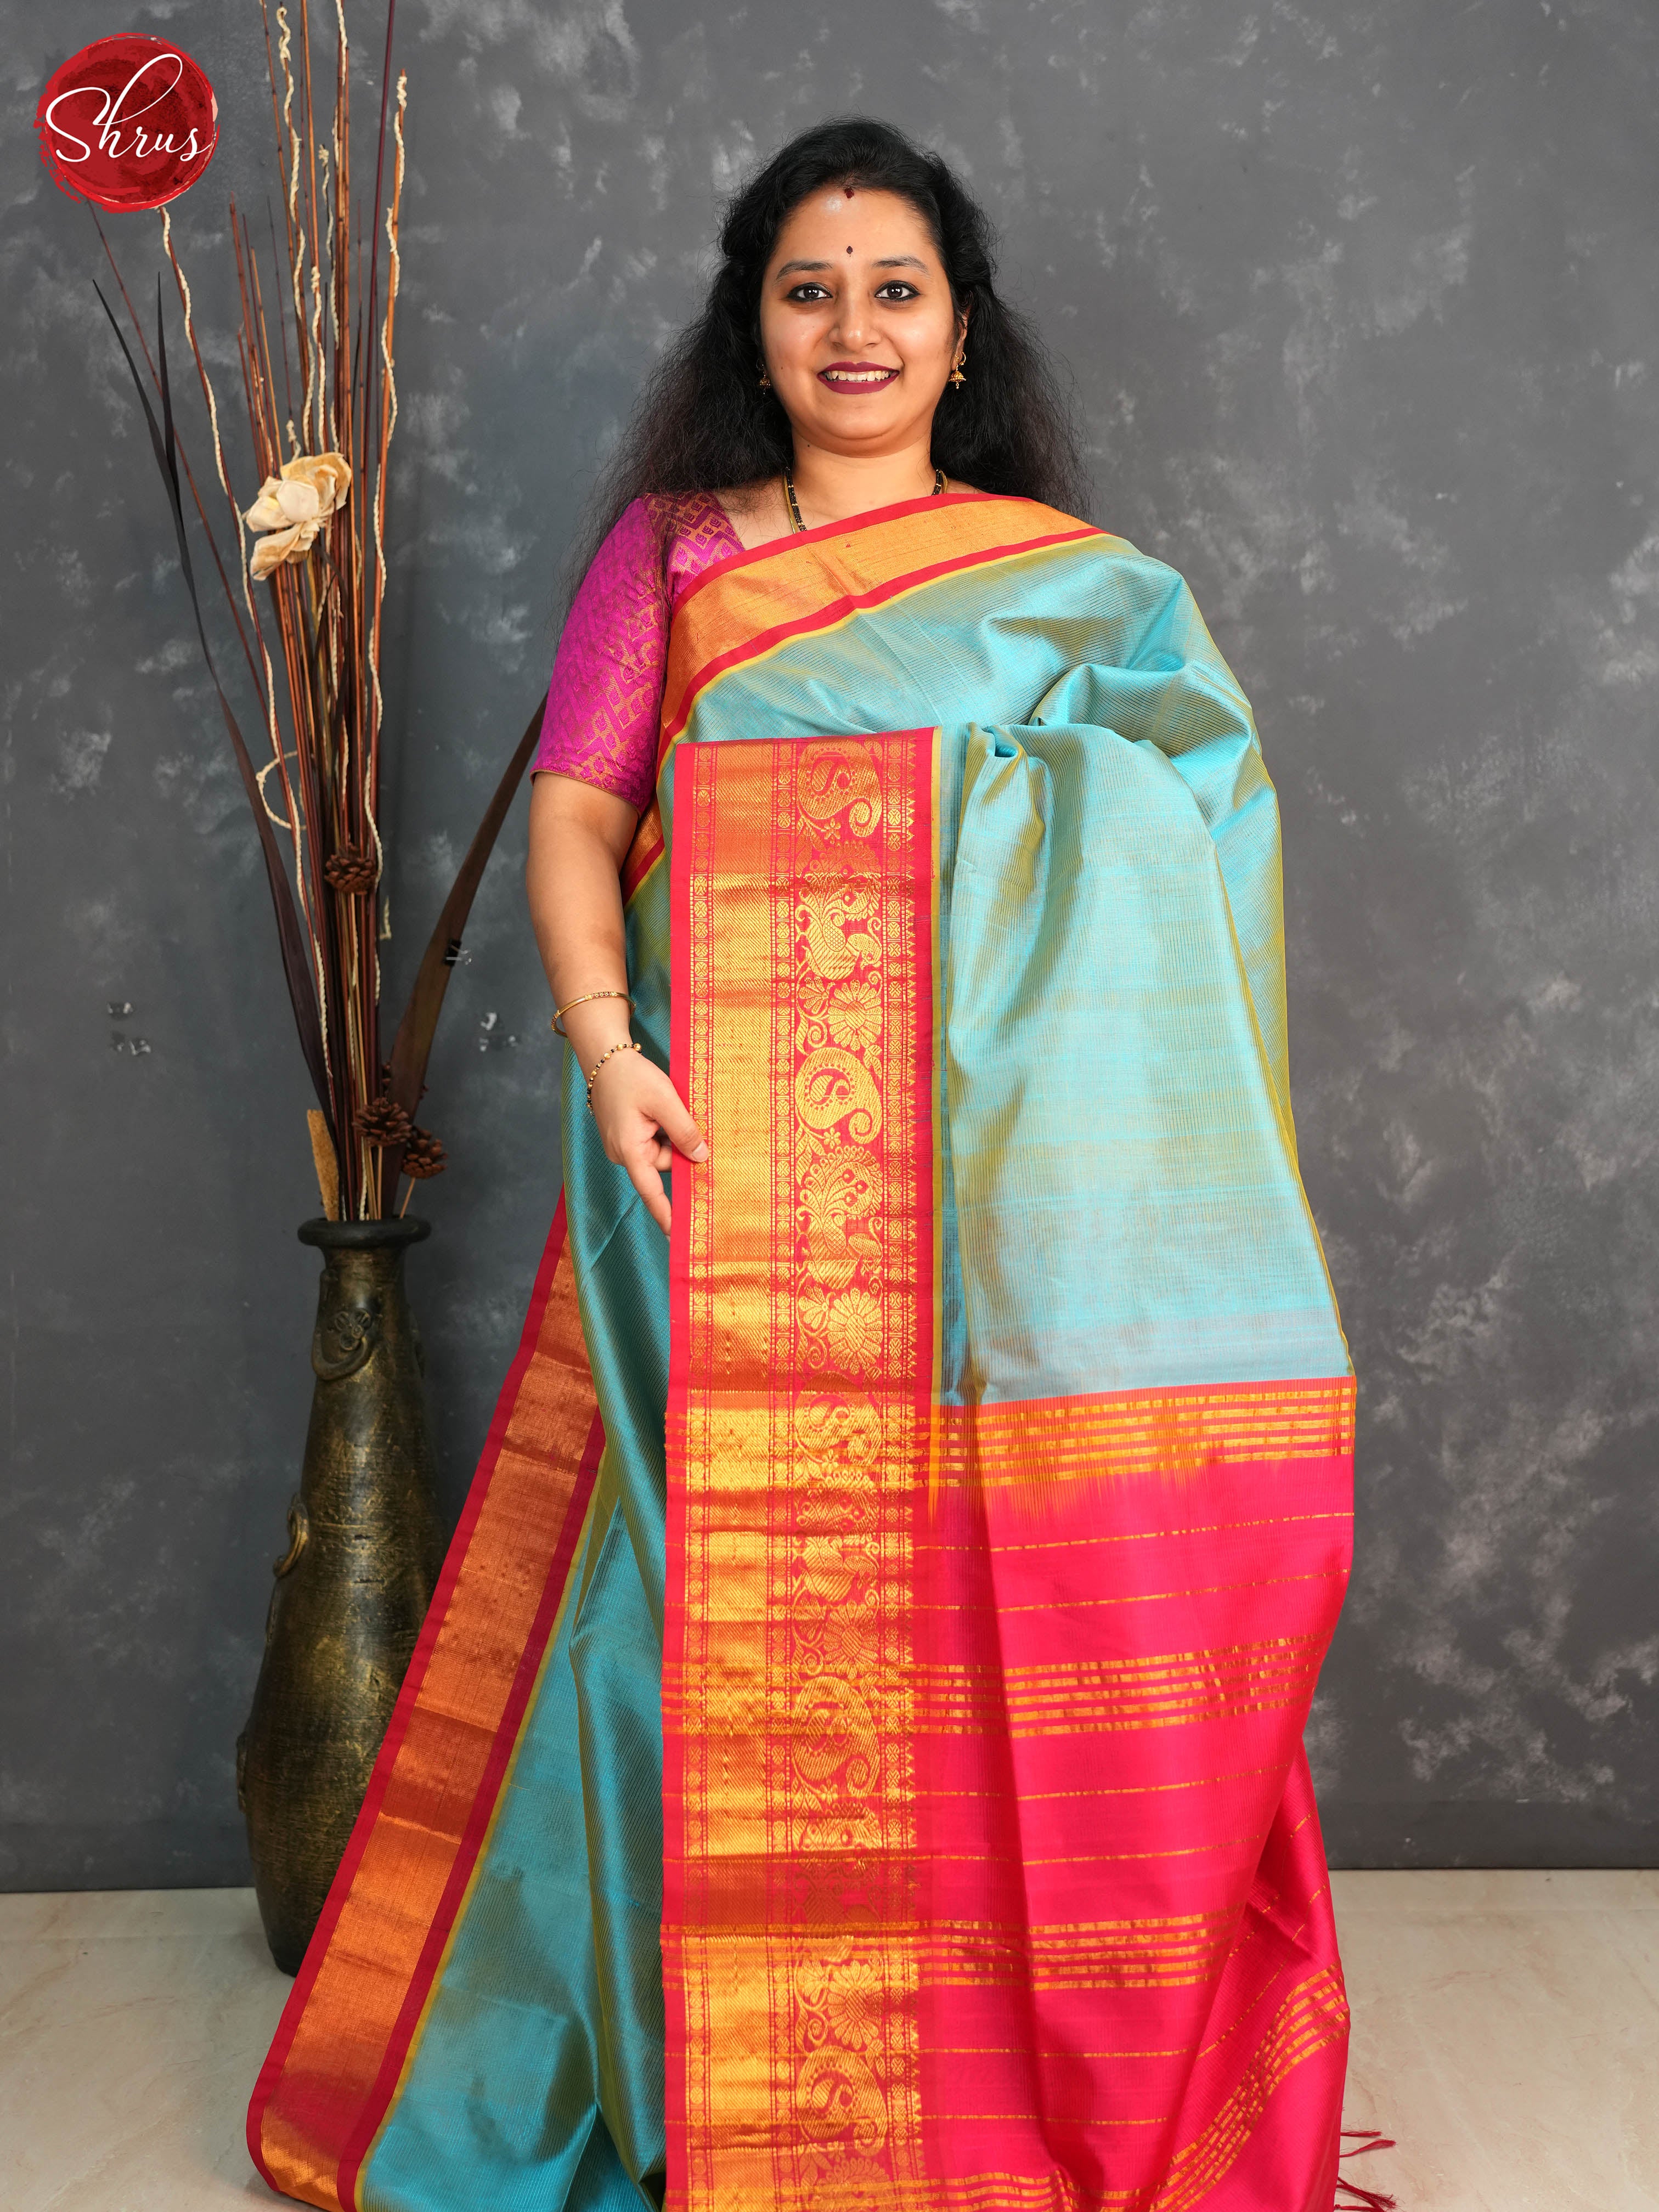 Double shaded Blue and Pink - Silk Cotton Saree - Shop on ShrusEternity.com